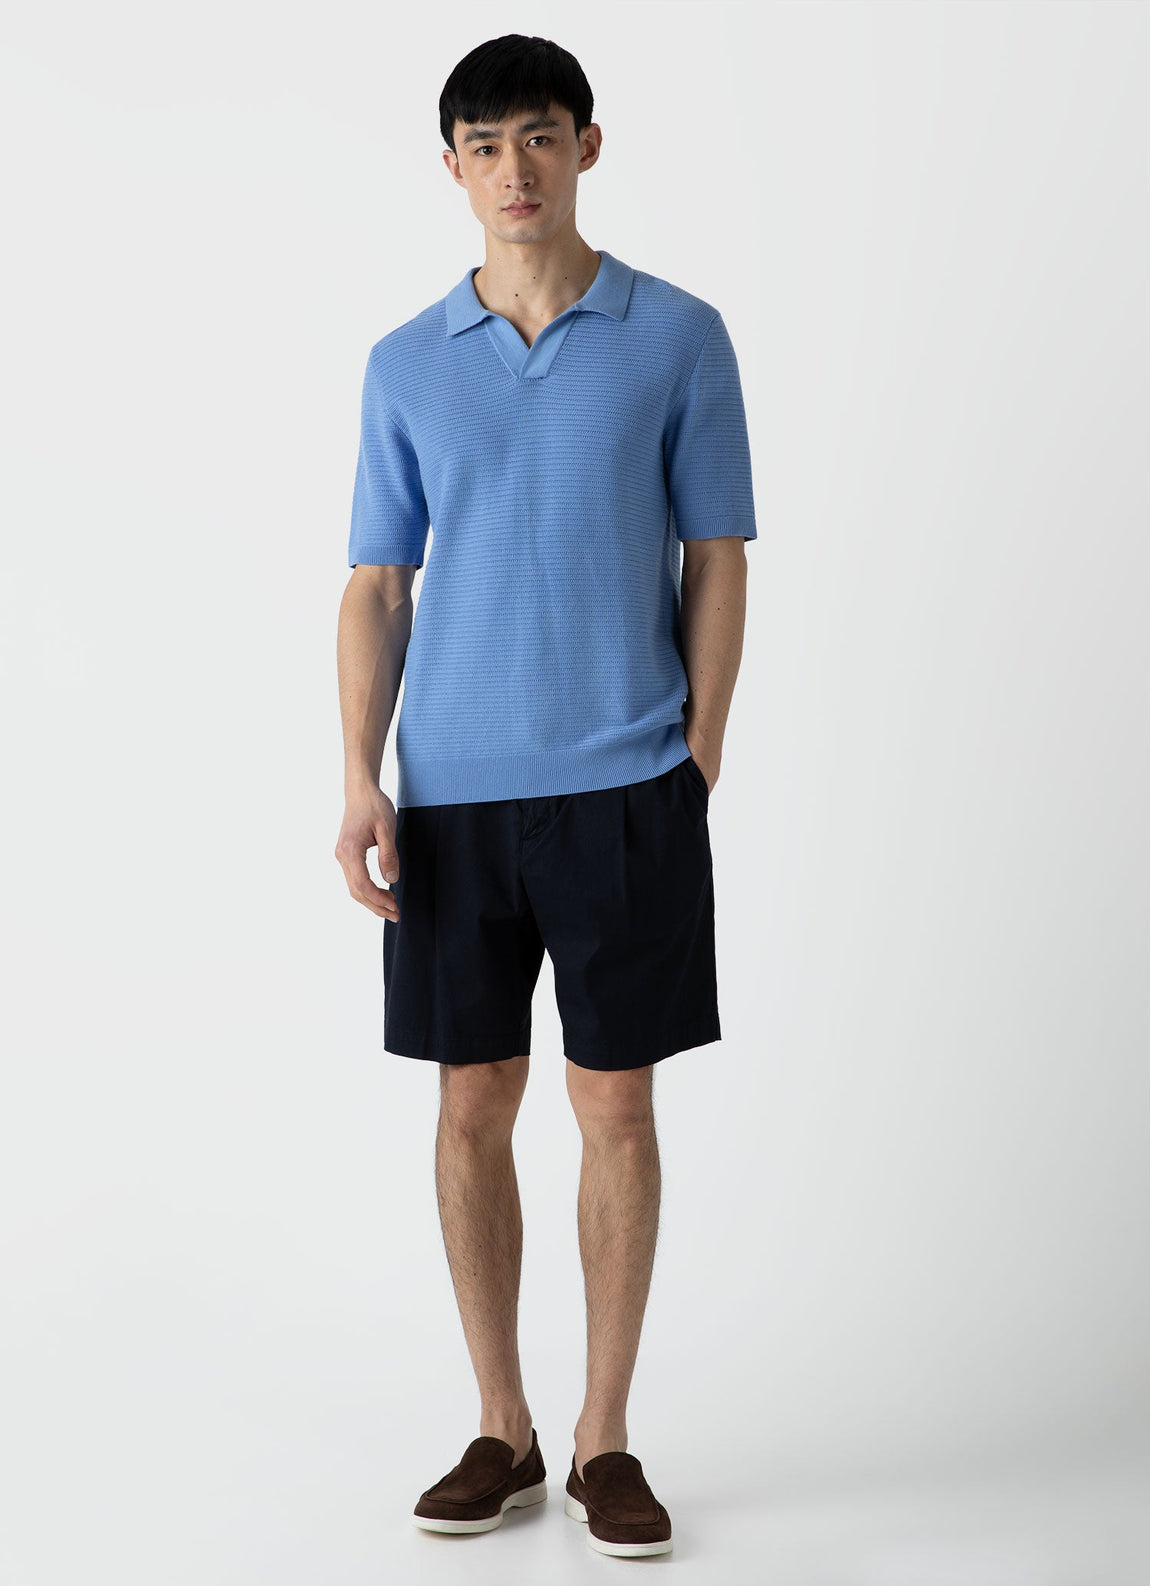 Men's Open Textured Polo Shirt in Cool Blue